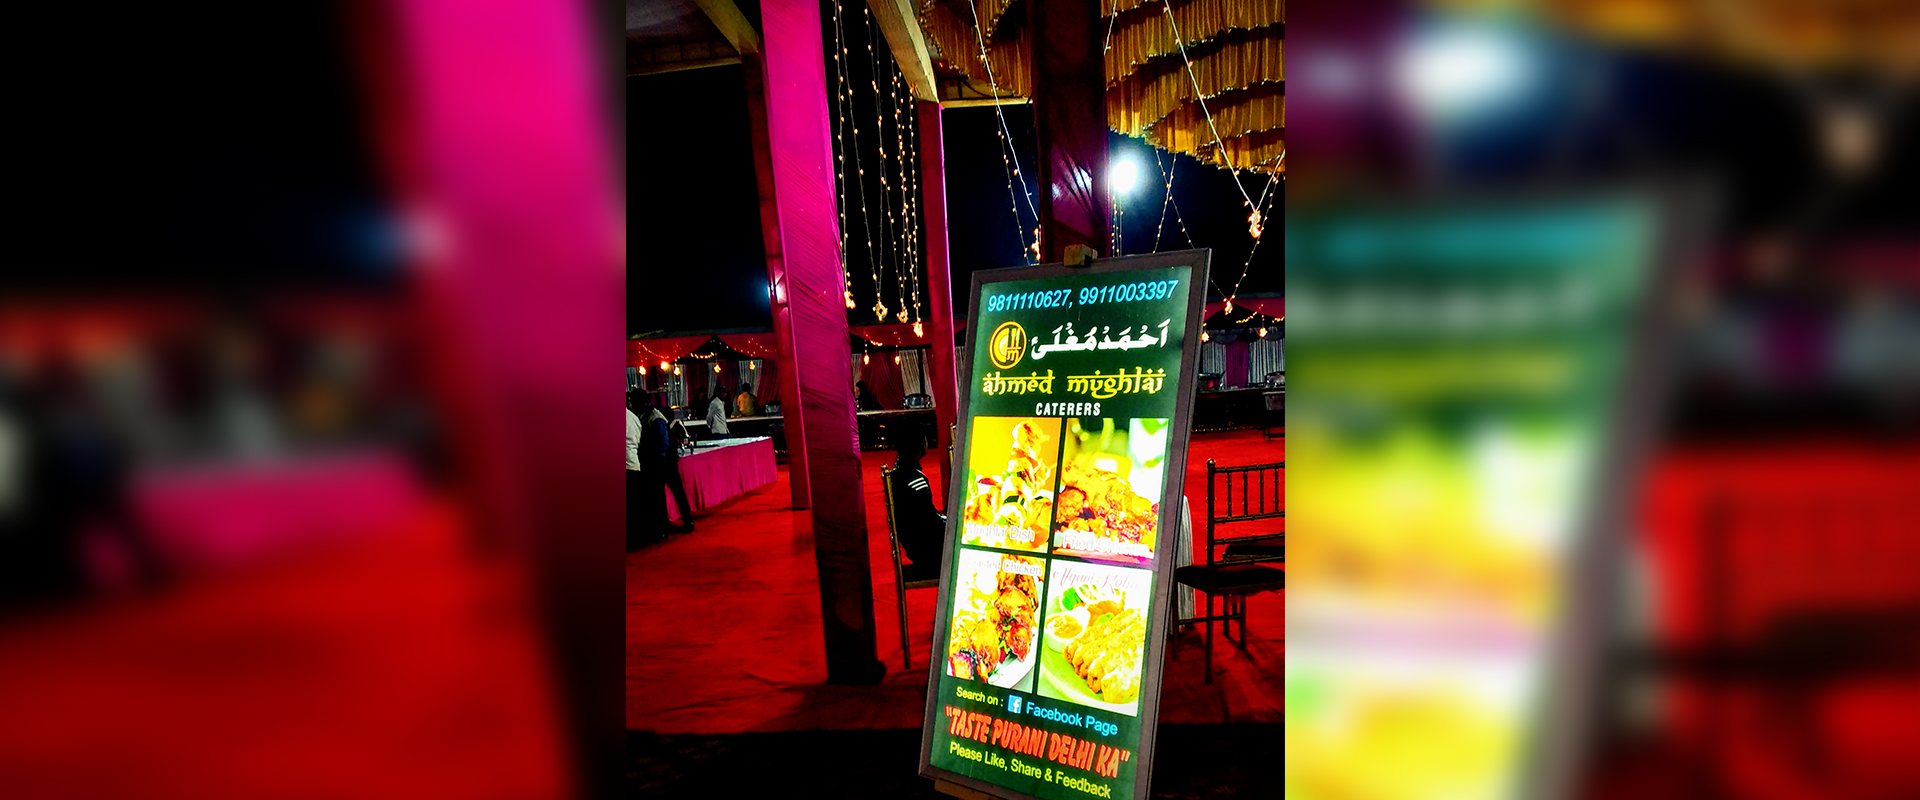 Wedding catering in Delhi | Corporate catering Services